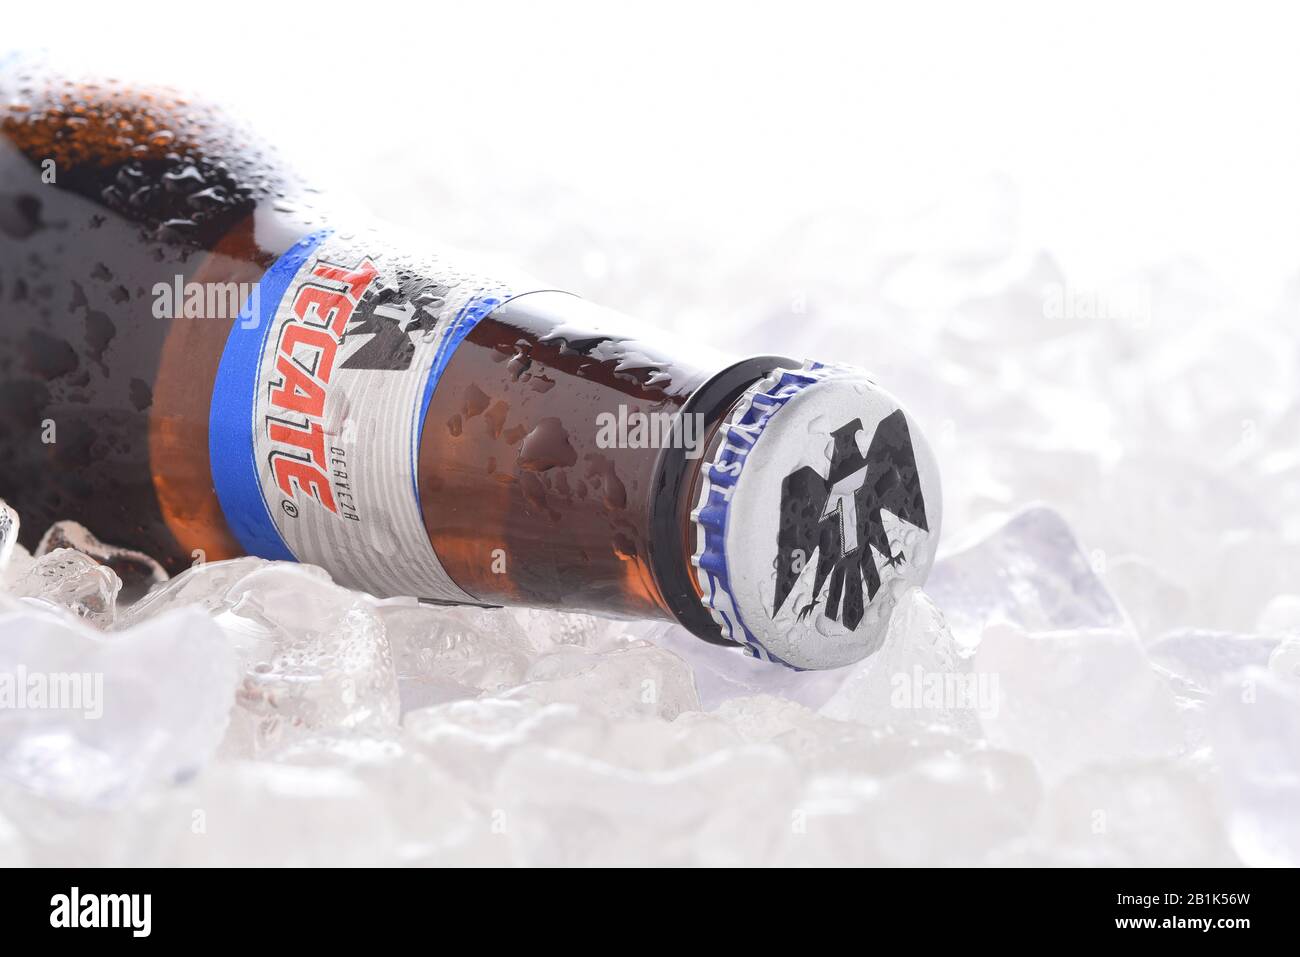 IRVINE, CA - JUNE 14, 2017: Tecate Light bottle on Ice.  A bottle of Tecate Light, a popular pale lager named after the city of Tecate, Baja Californi Stock Photo